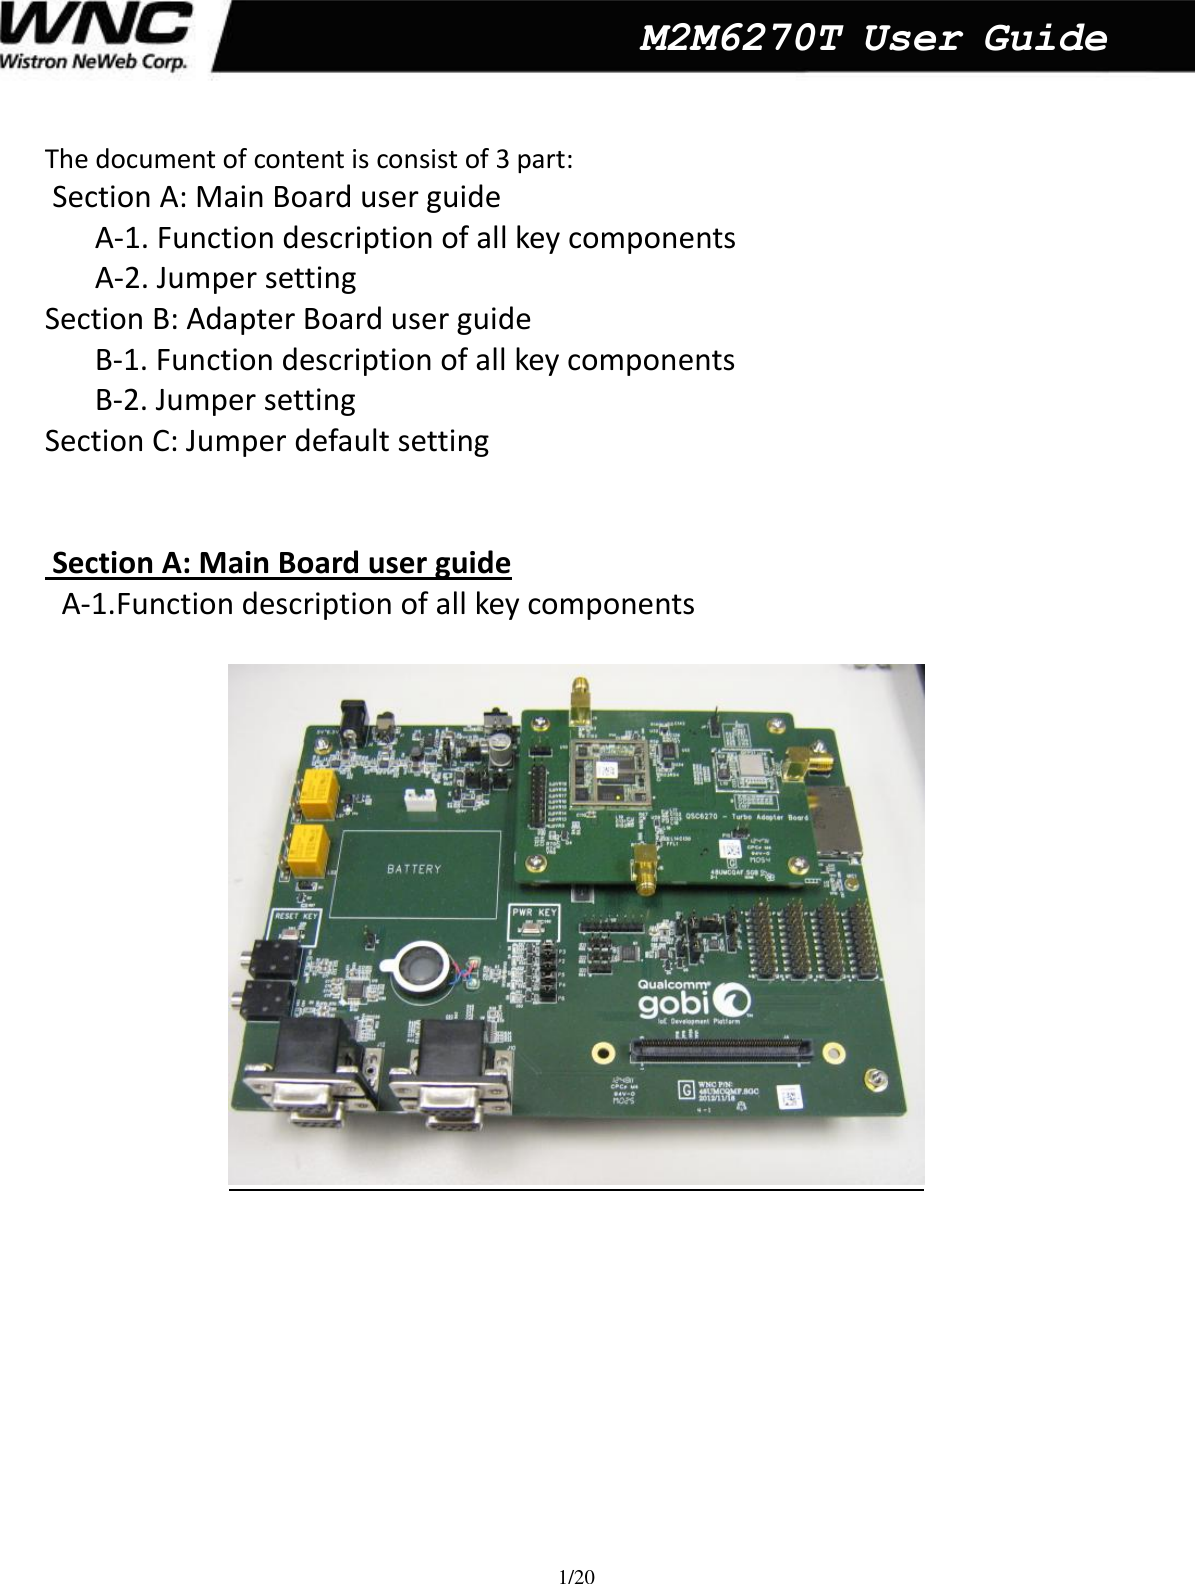  1/20  M2M6270T User Guide The document of content is consist of 3 part:  Section A: Main Board user guide A-1. Function description of all key components A-2. Jumper setting Section B: Adapter Board user guide B-1. Function description of all key components B-2. Jumper setting Section C: Jumper default setting    Section A: Main Board user guide A-1.Function description of all key components     